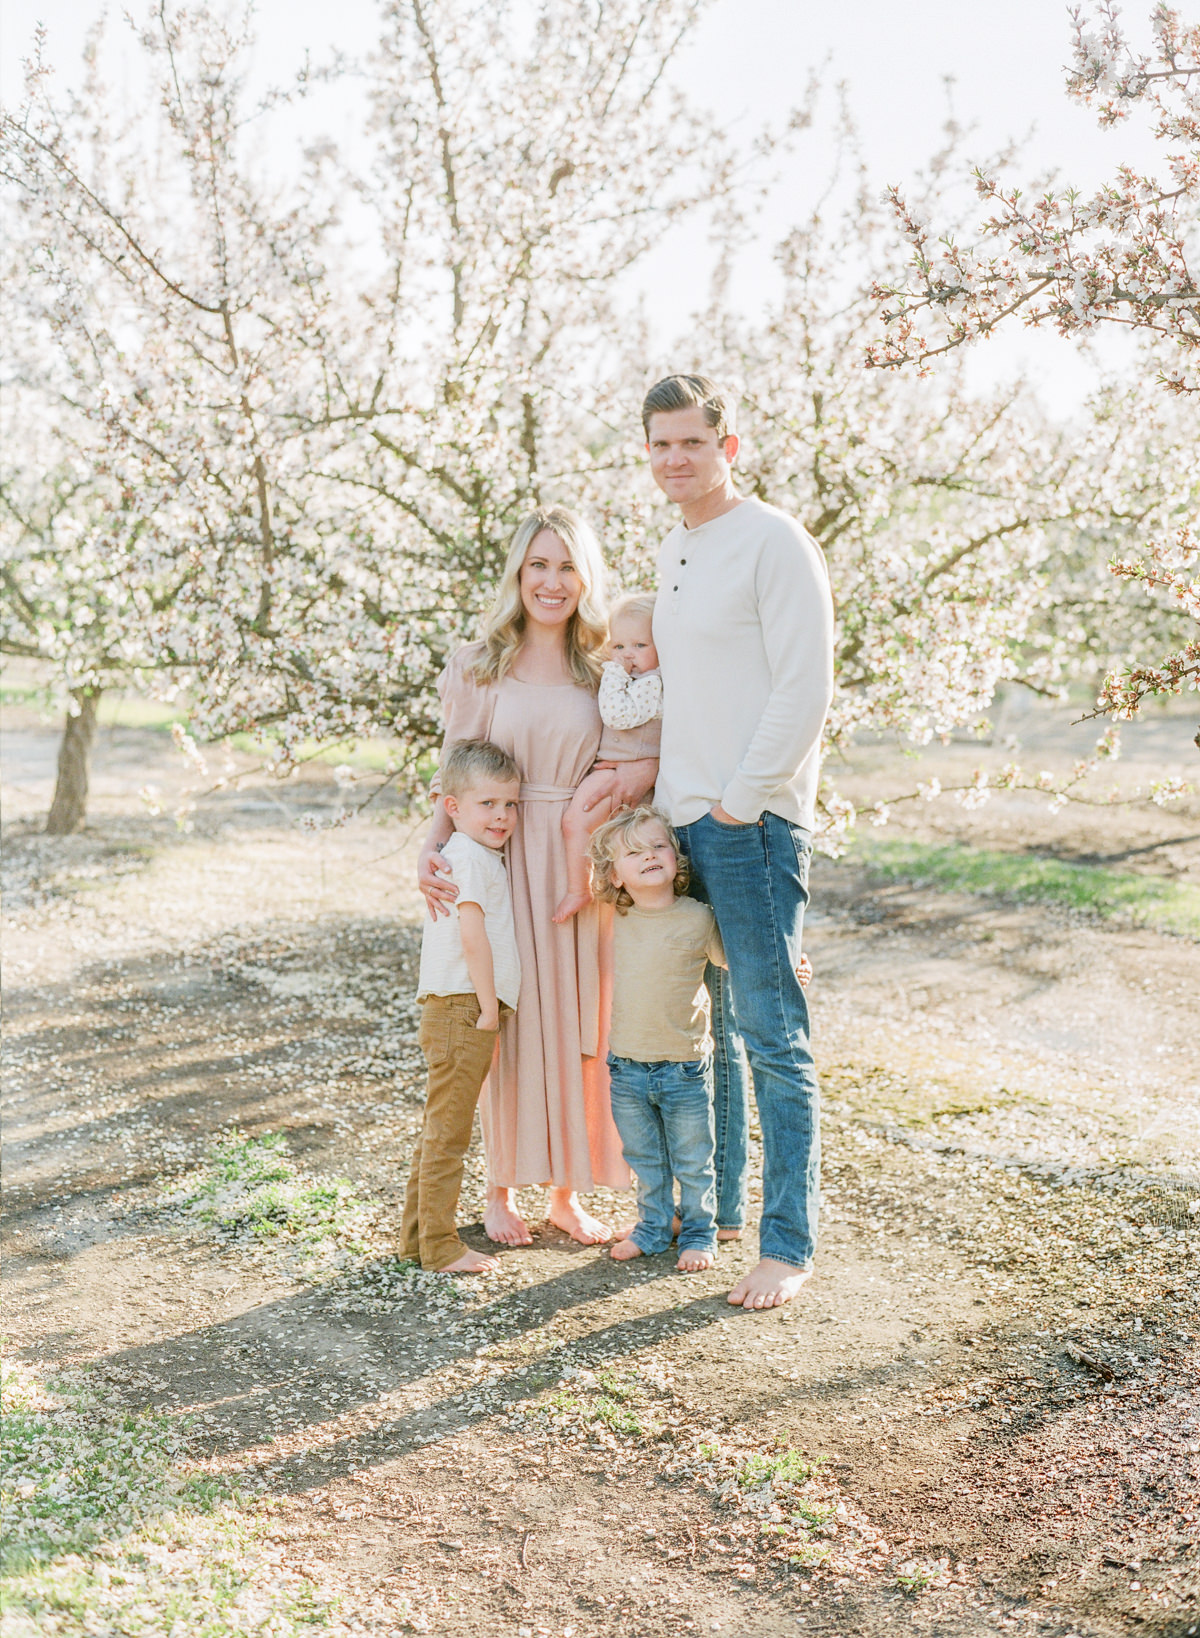 Central Valley Family Session, Almond Grove, Family Photography on Film, San Francisco Bay Area Family Film Photographer Kent Avenue Photography Light and Airy 